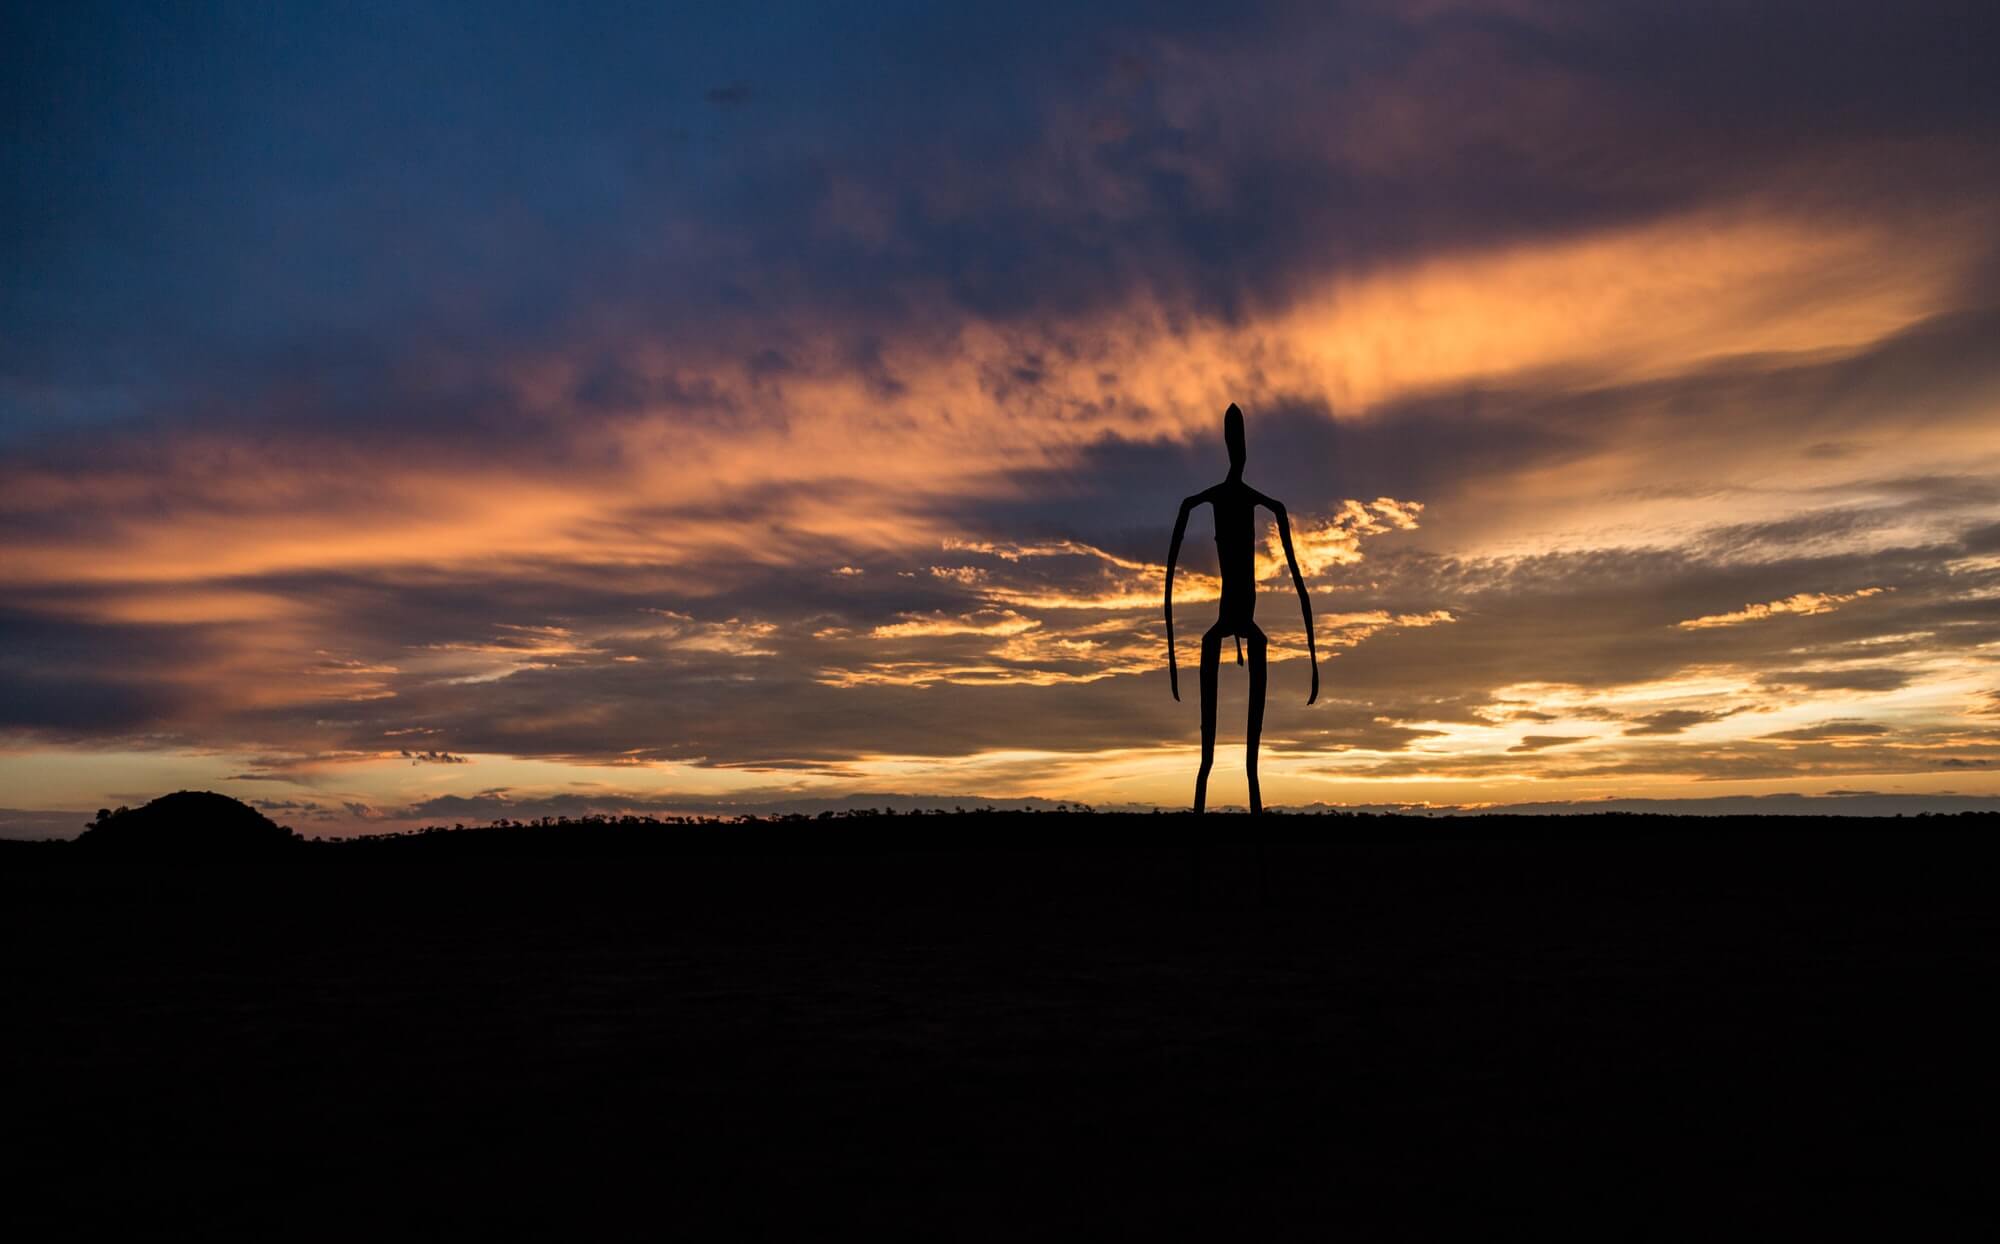 Antony Gormley did an extraordinary job in creating these sculptures in Lake Ballard Western Australia. Visions of aliens in an alien landscape came to mind.